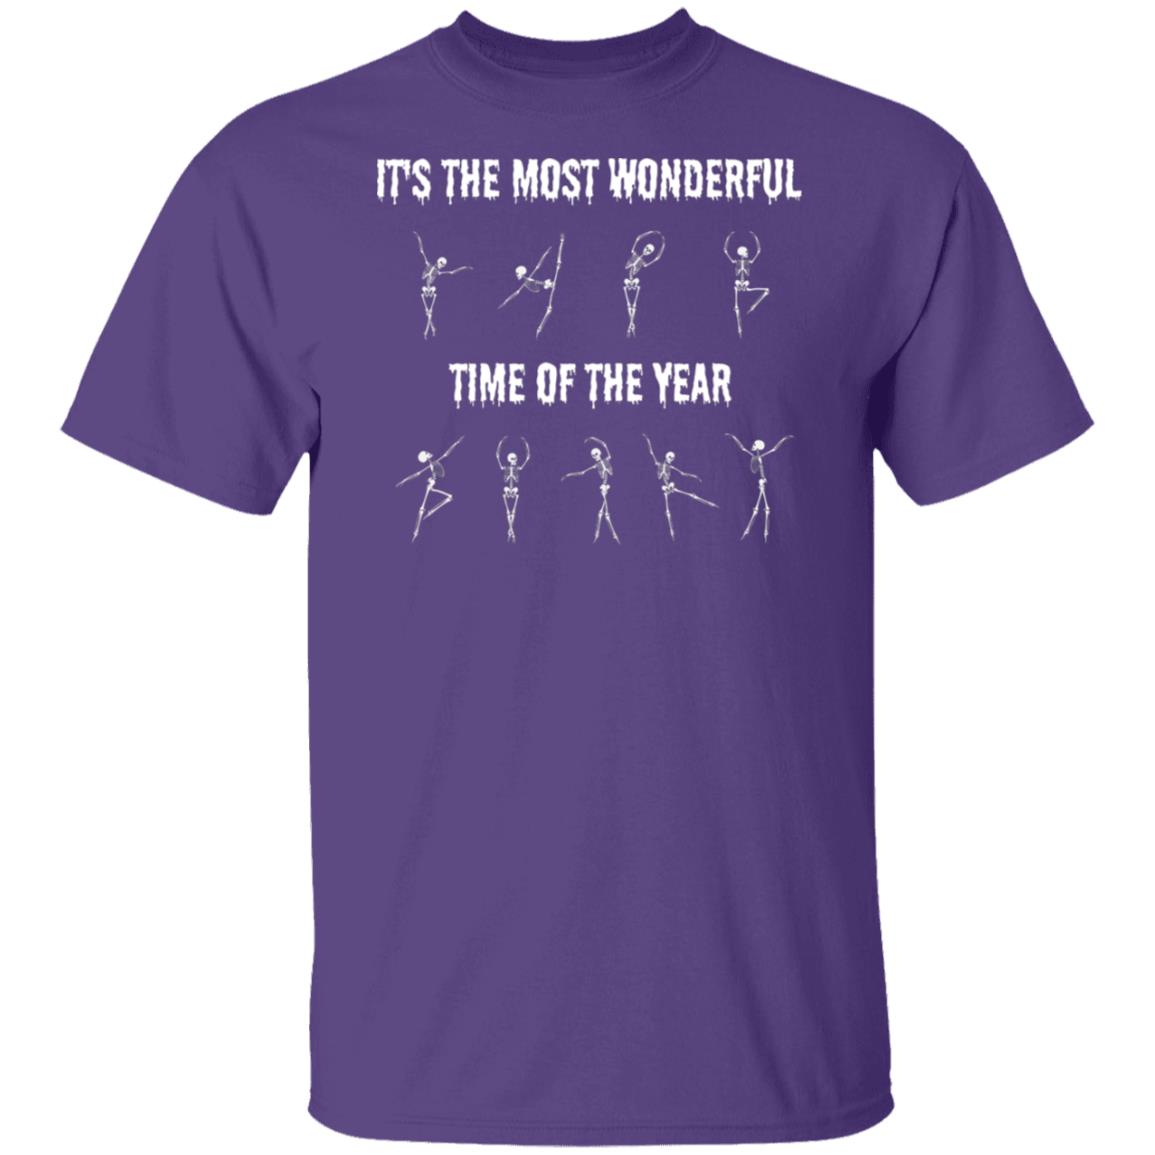 It's most wonderful time of the year Halloween T Shirt